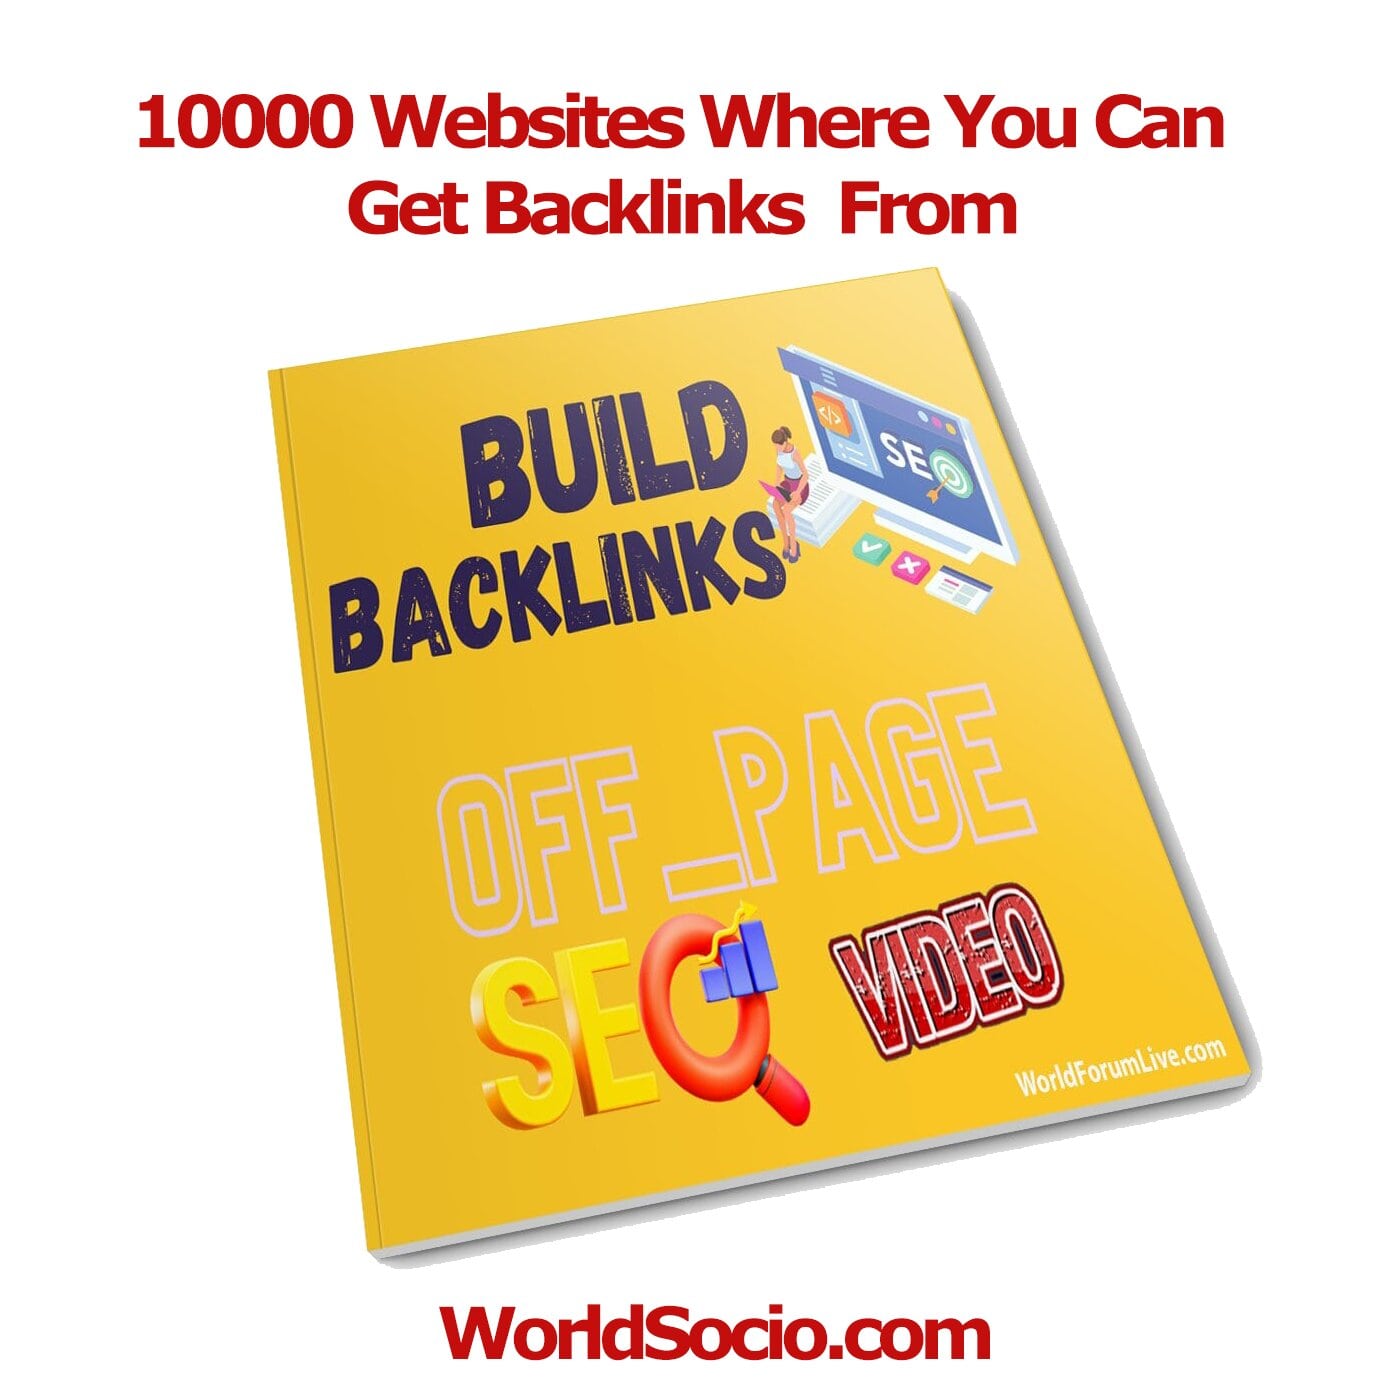 10000-Websites-Where-You-Can-Get-Backlinks--From,-worldsocio.jpg